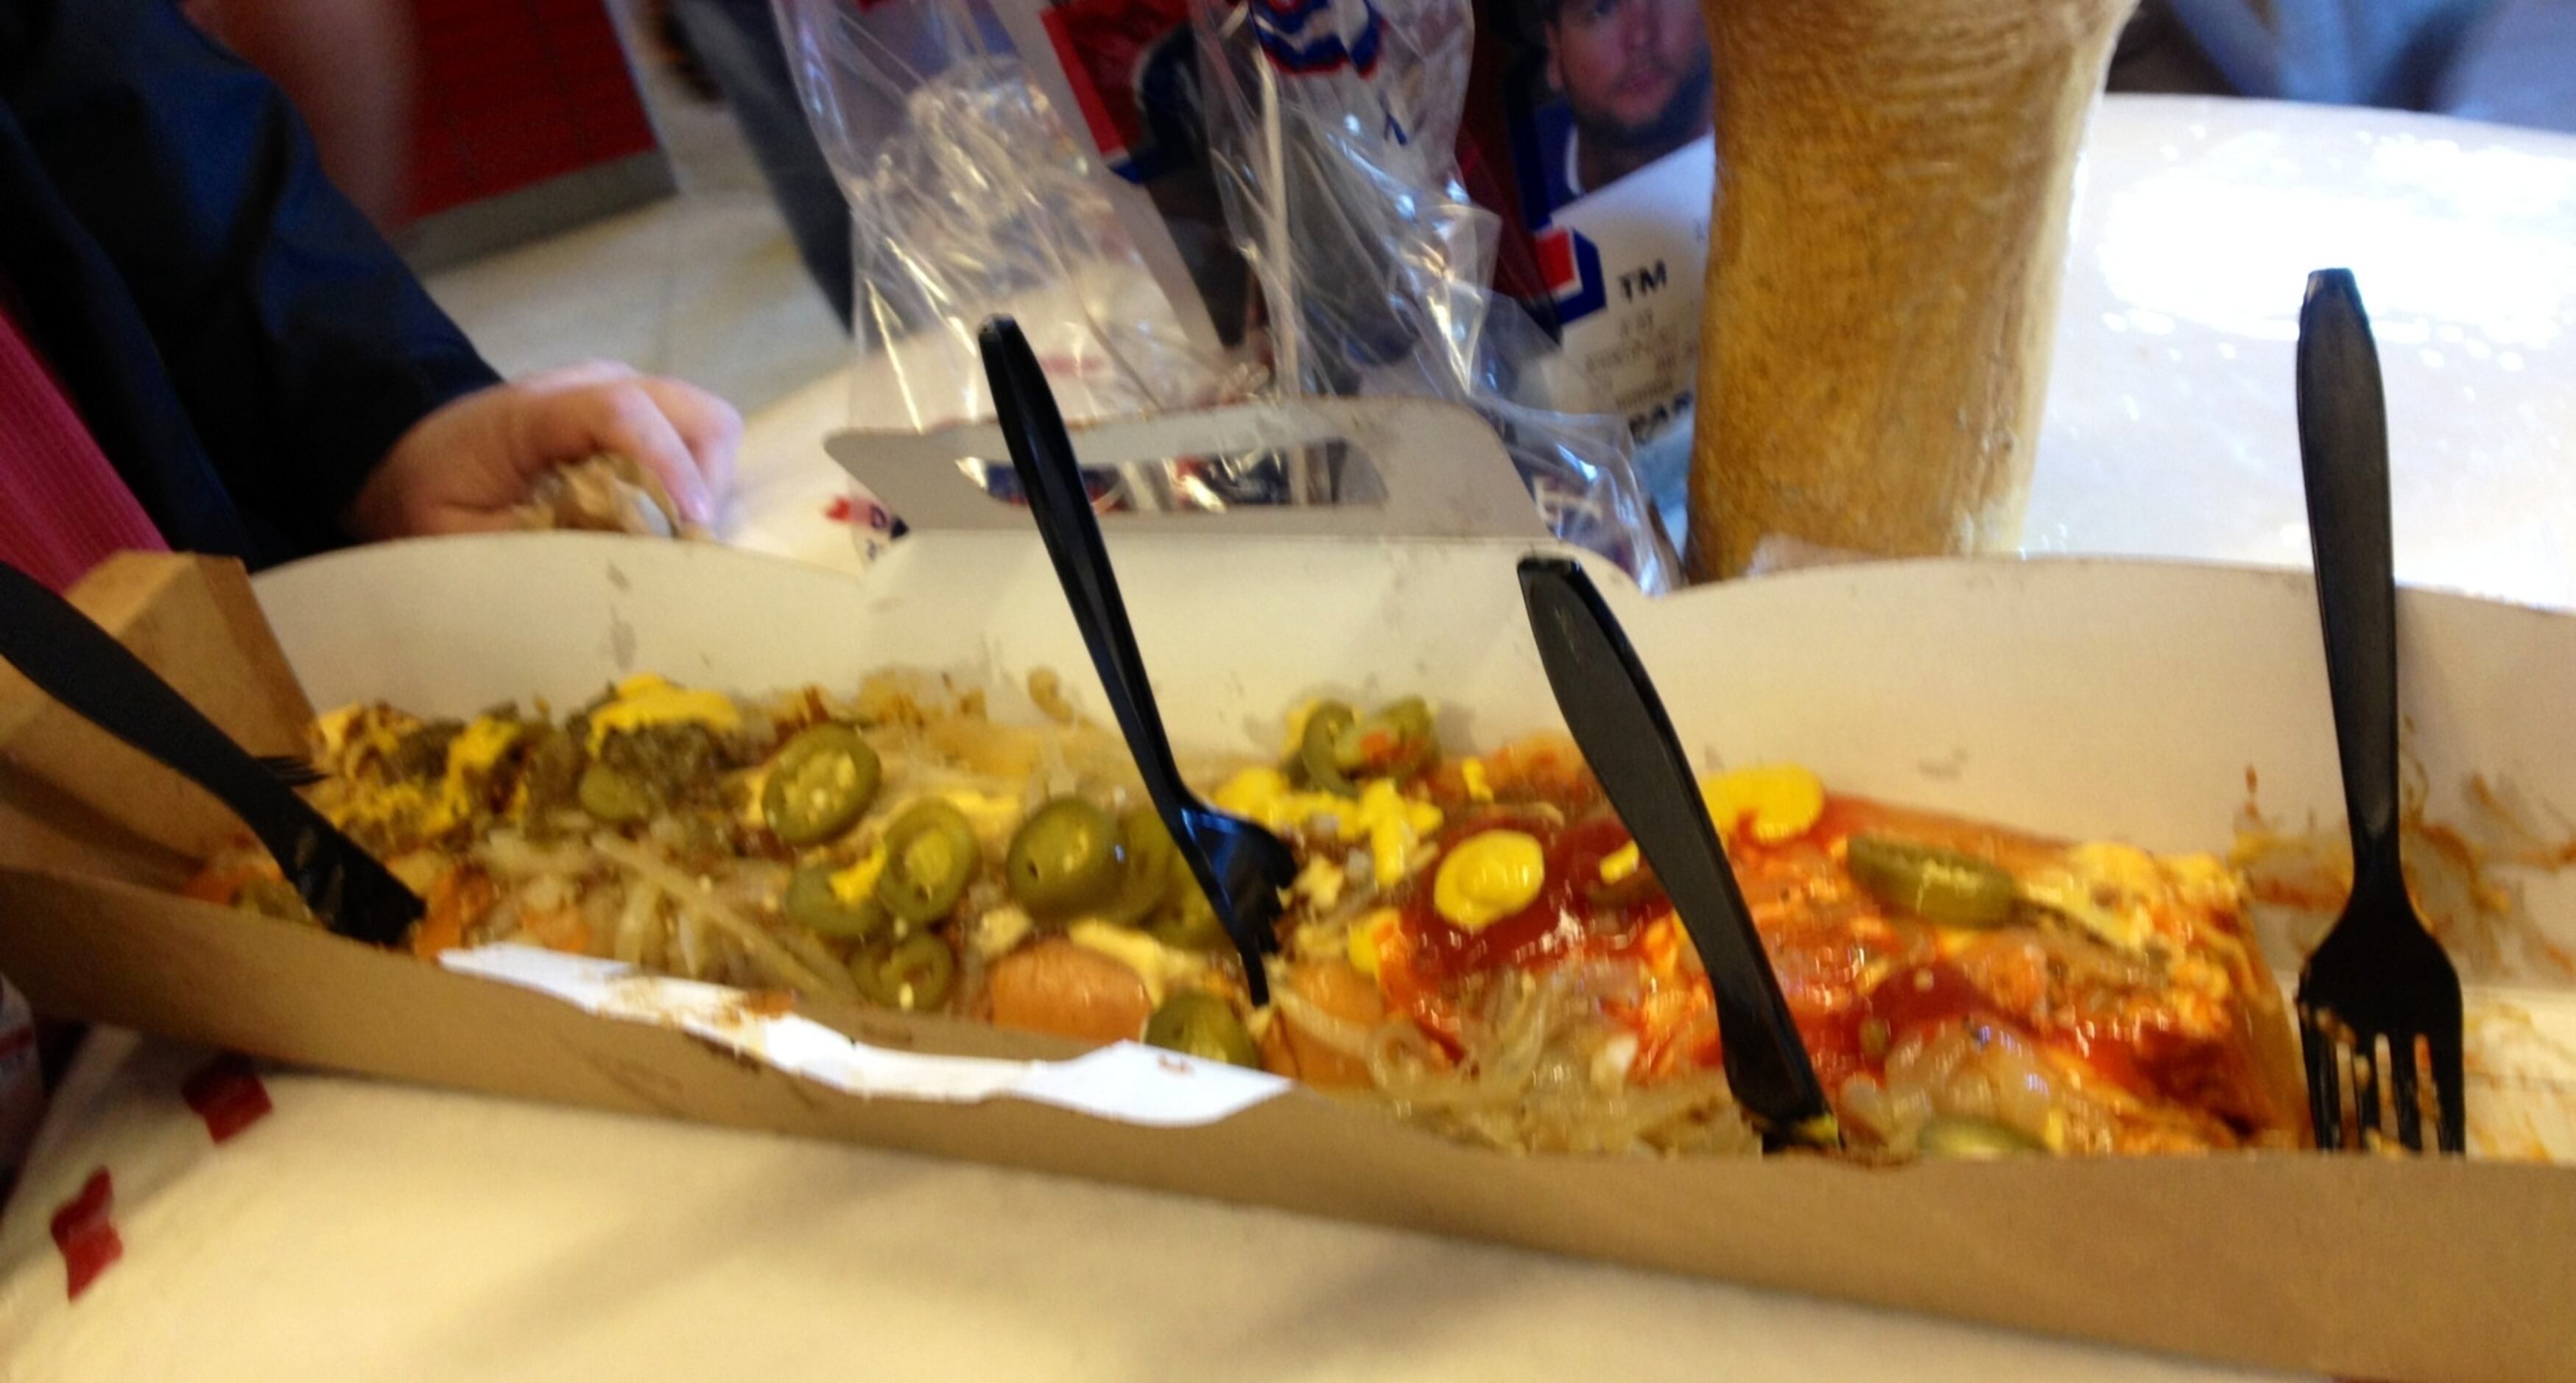 The viral Texas Rangers Boomstick hot dog has actually been around